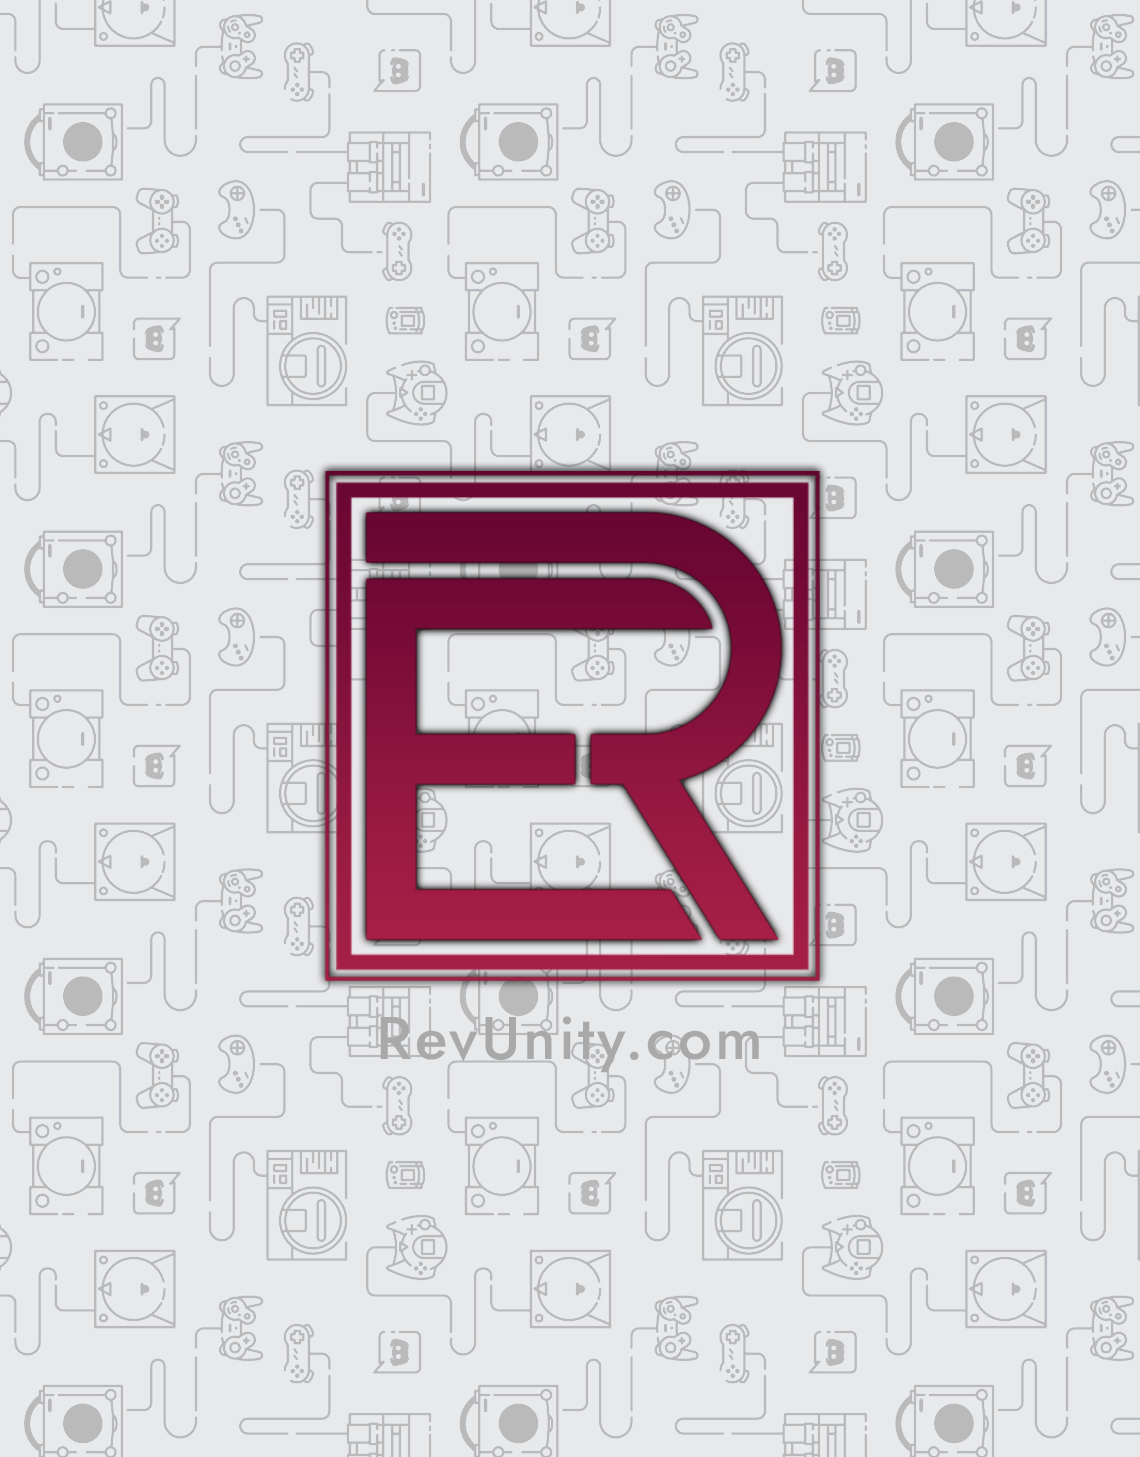 Sell redengine fivem executor by Ithinkimgood2